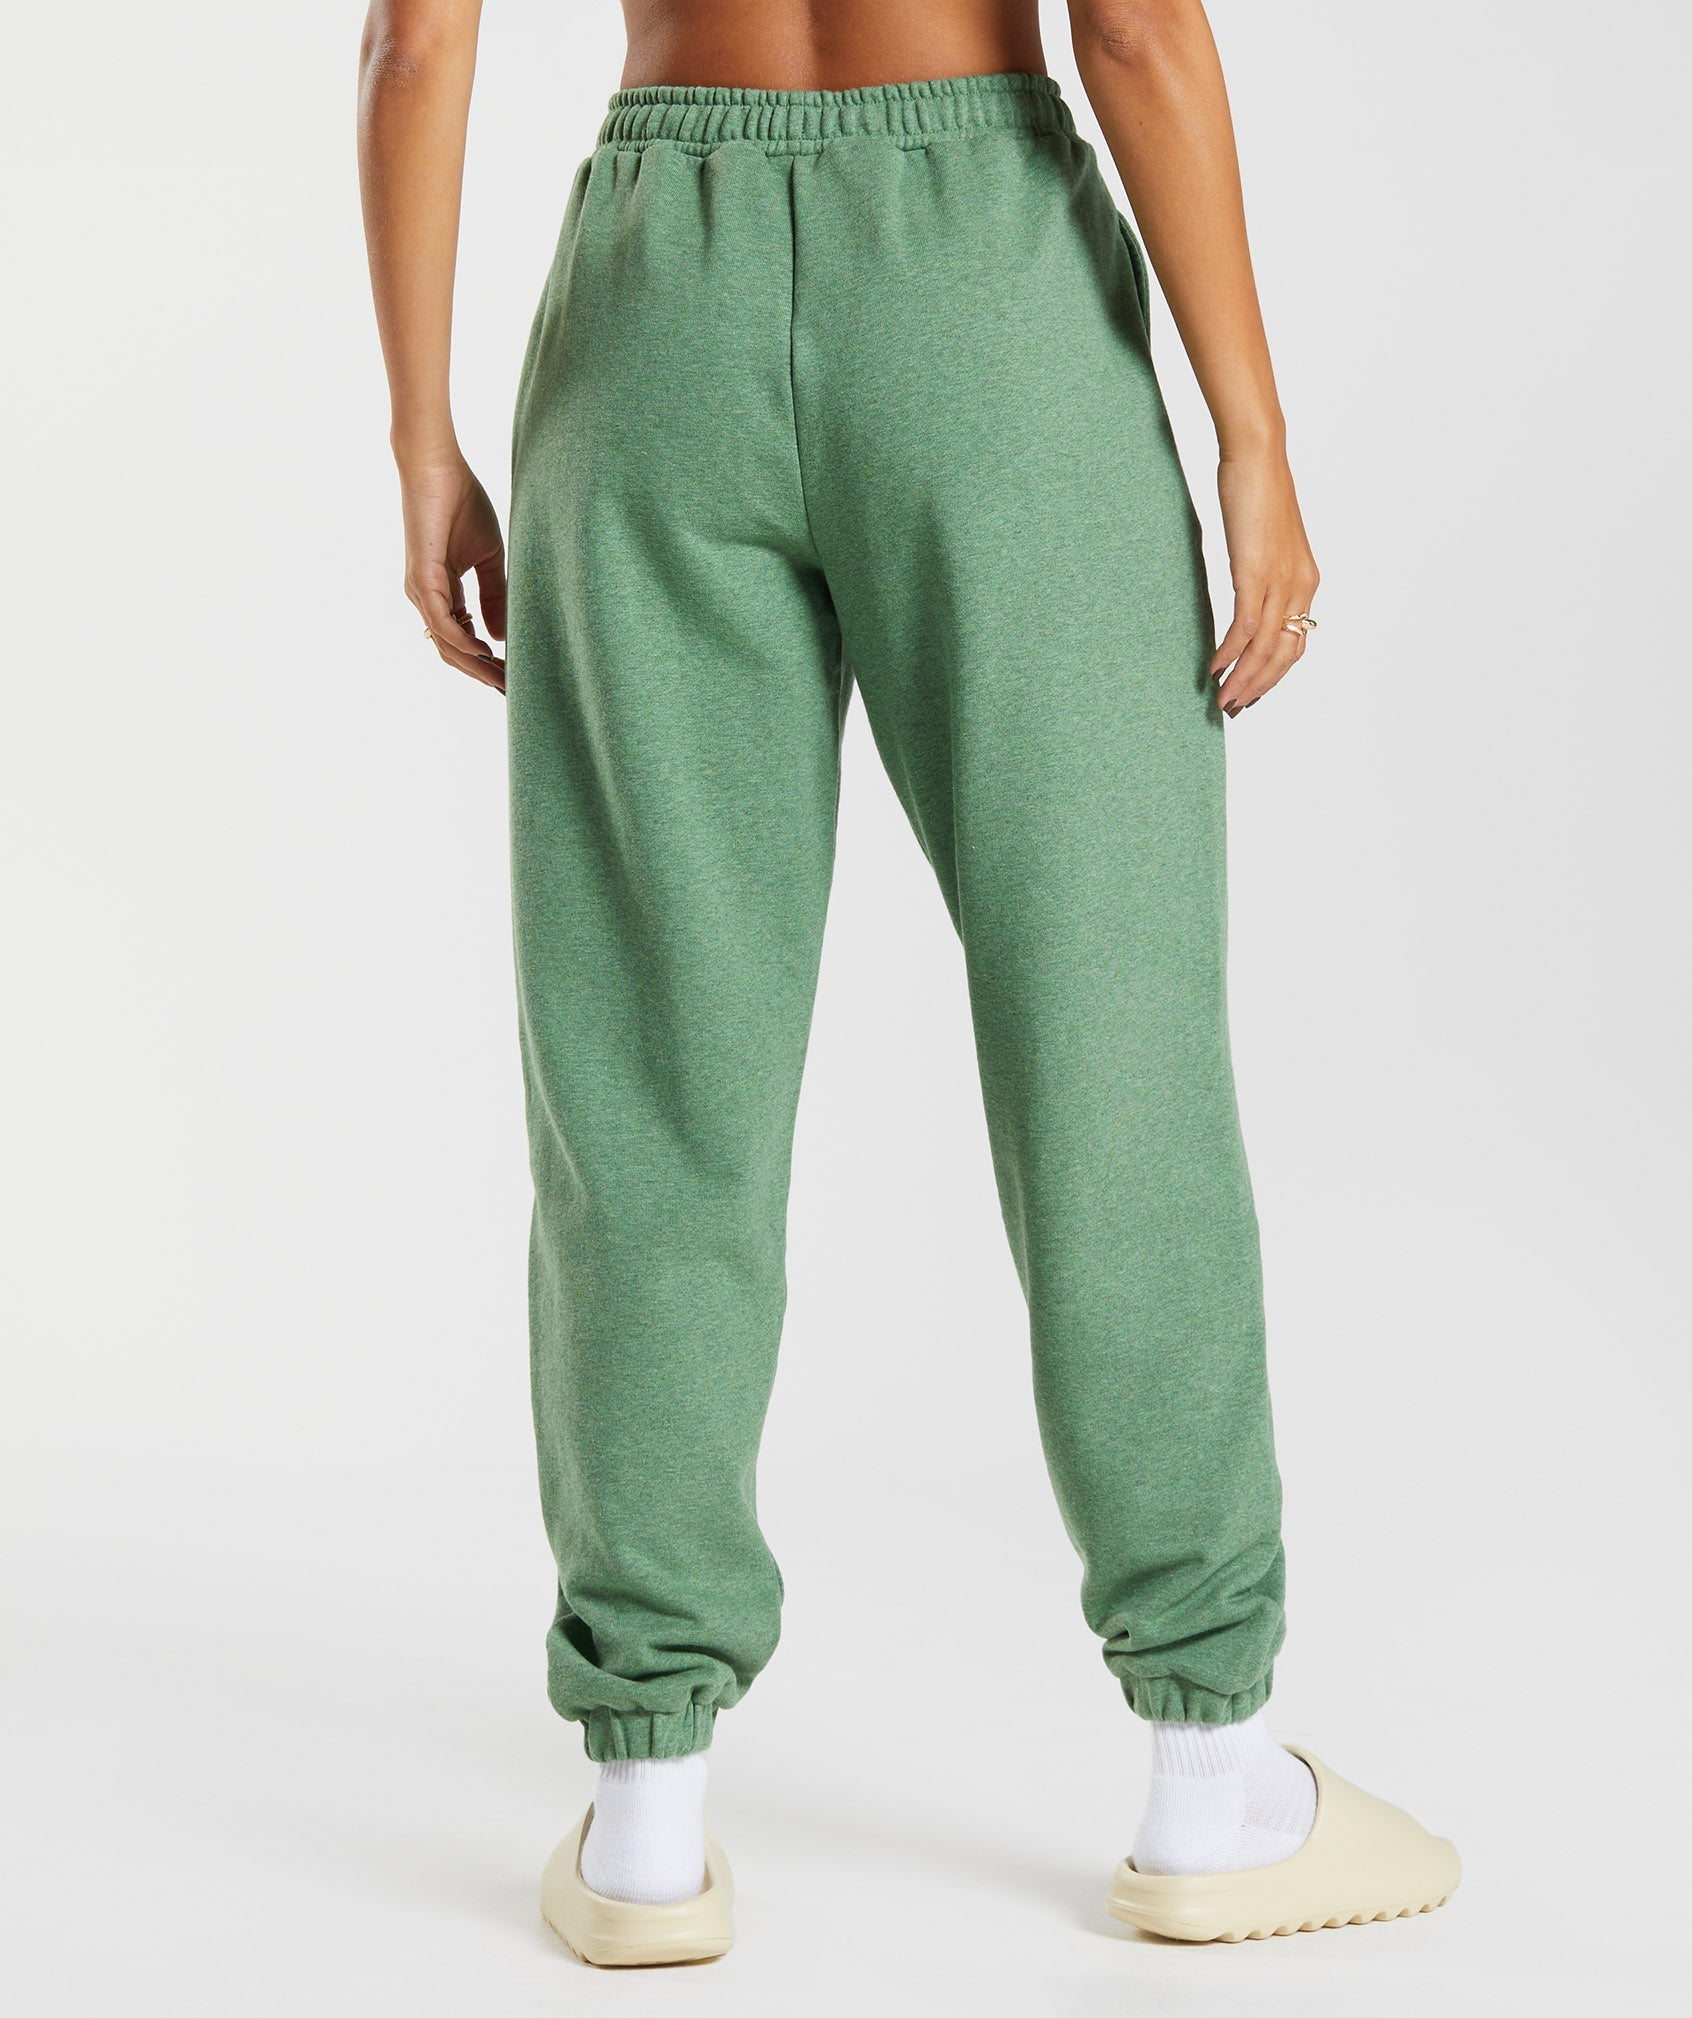 Rest Day Sweats Joggers in Crocodile Green Marl - view 3